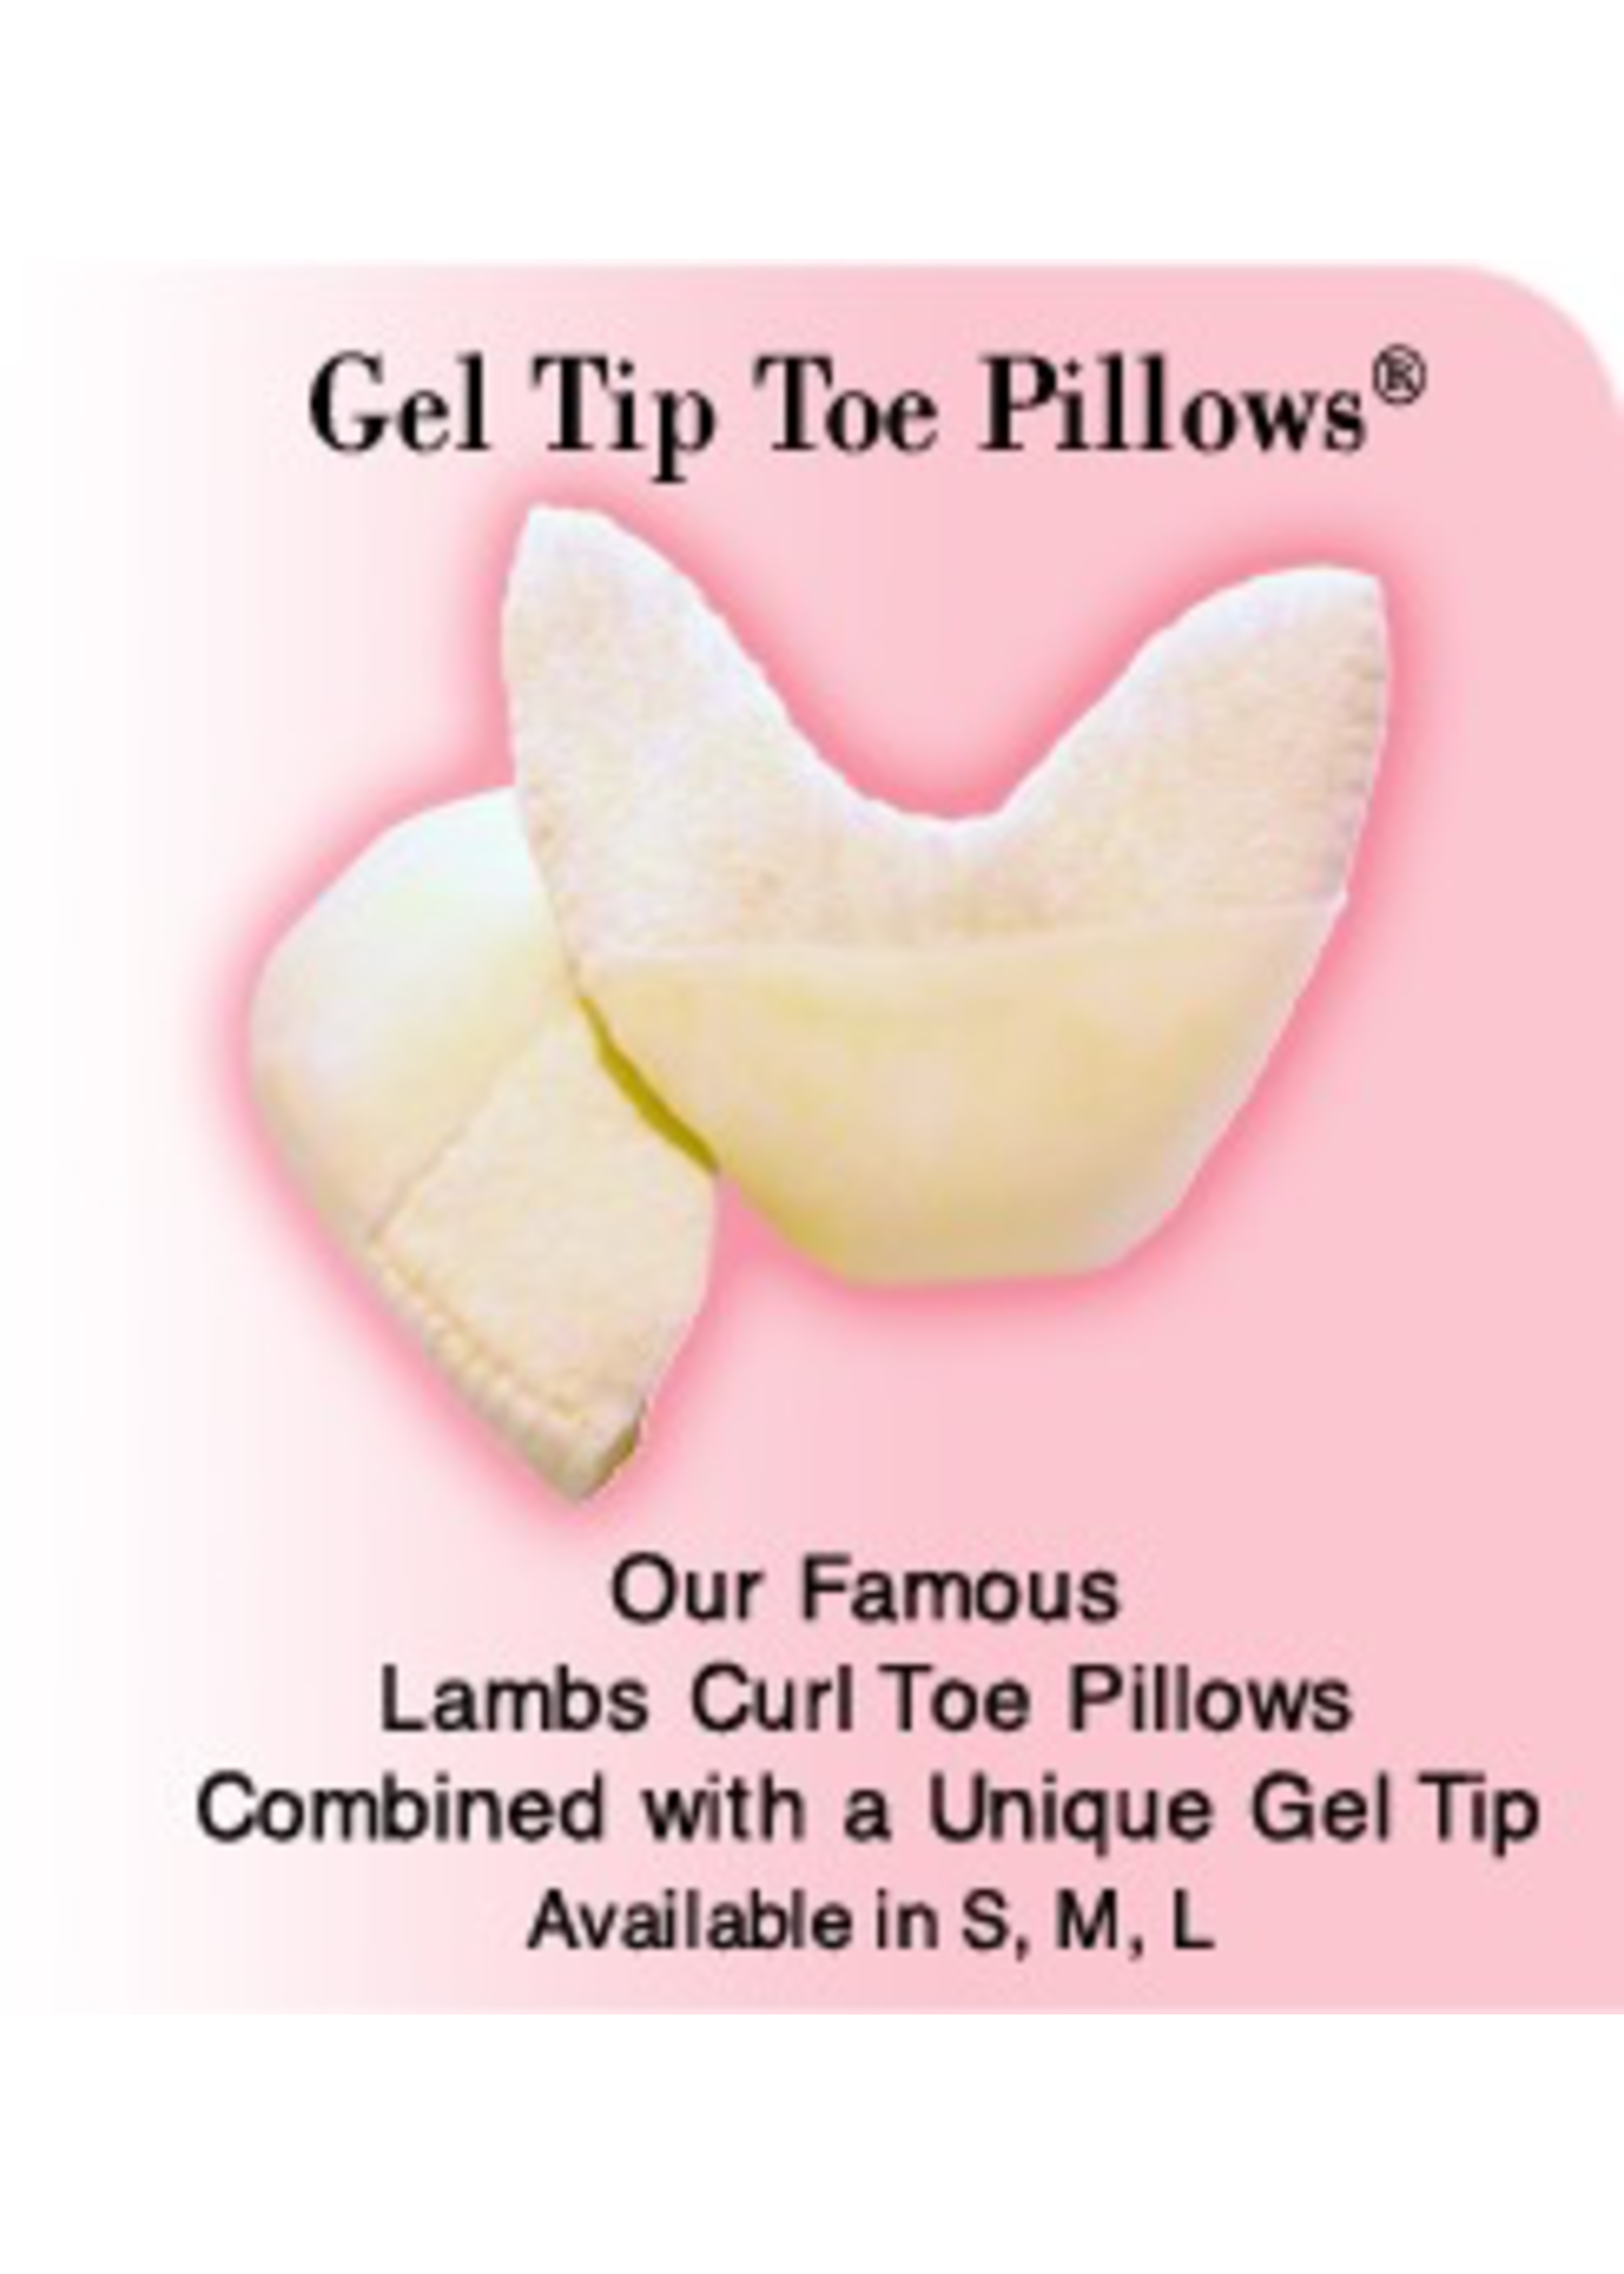 PILLOWS FOR POINTES GTTP GEL TIP TOE PILLOW